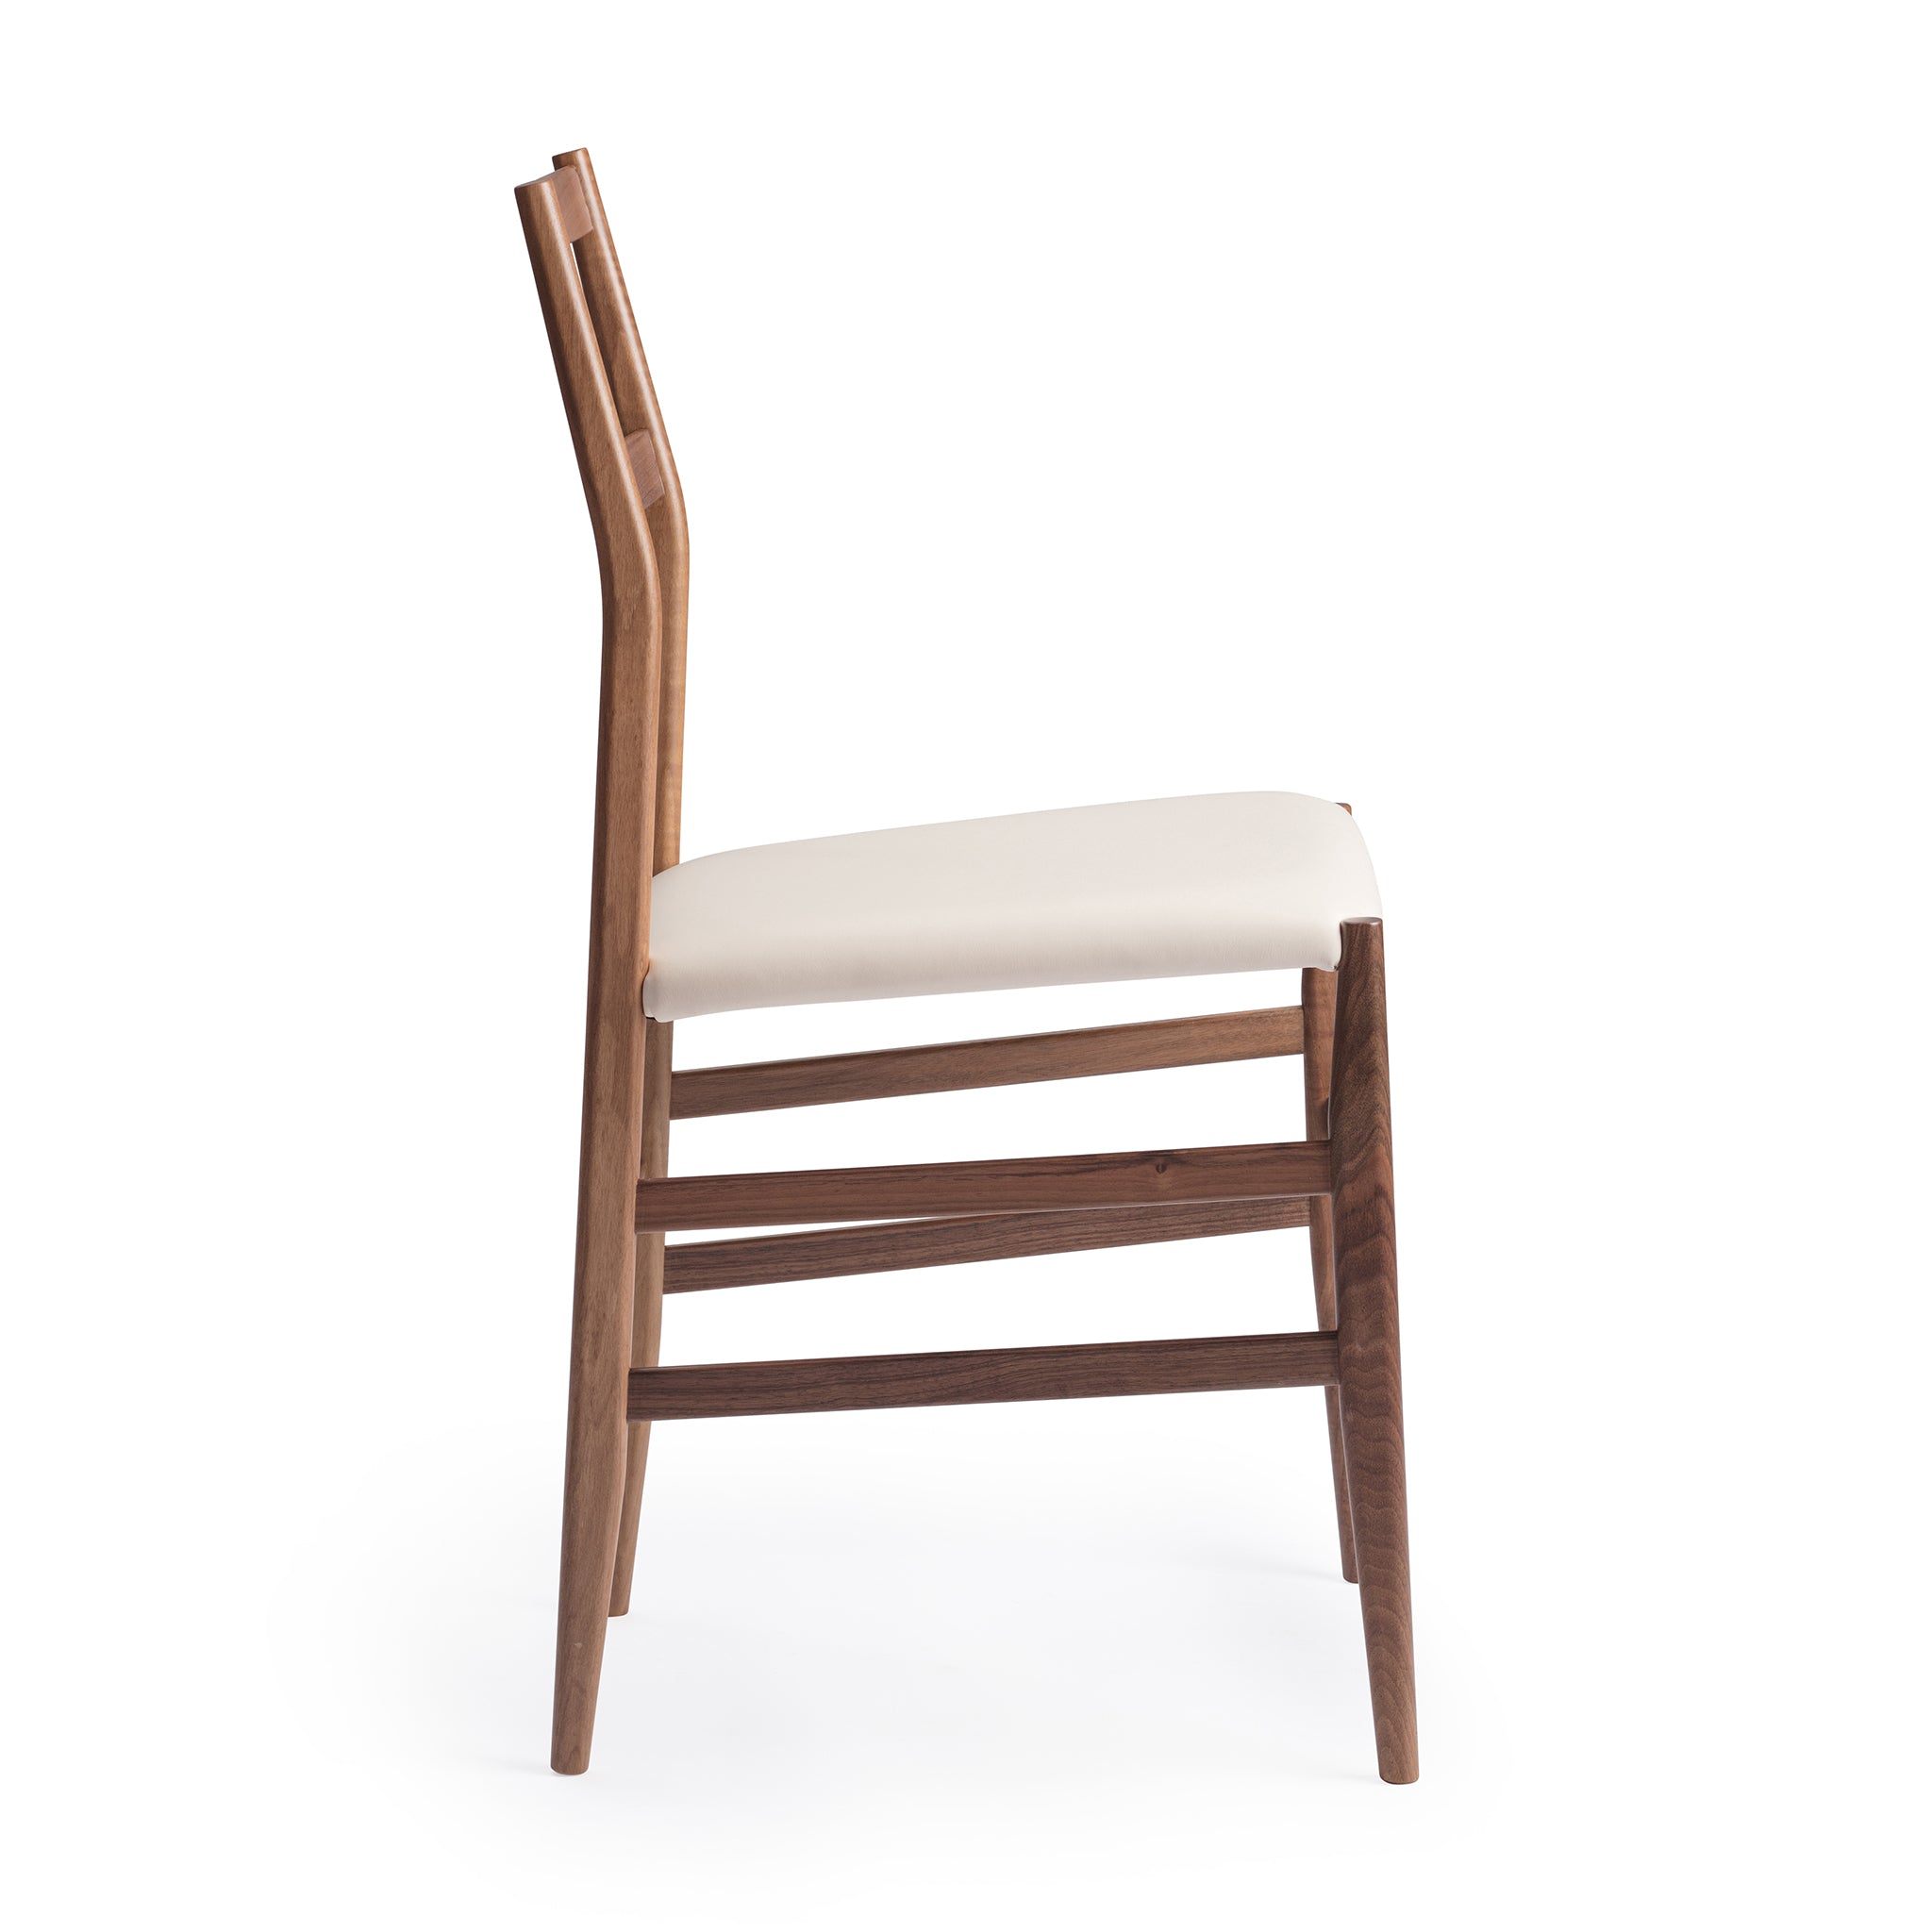 Side view of a Snella Modern Side Chair, american walnut frame, soft white leather seat, closely resembling the superleggera chair by Gio Ponti, ultra-lightweight at 5 lbs, contract grade. Manufactured by Klarel in Italy. #K42-5